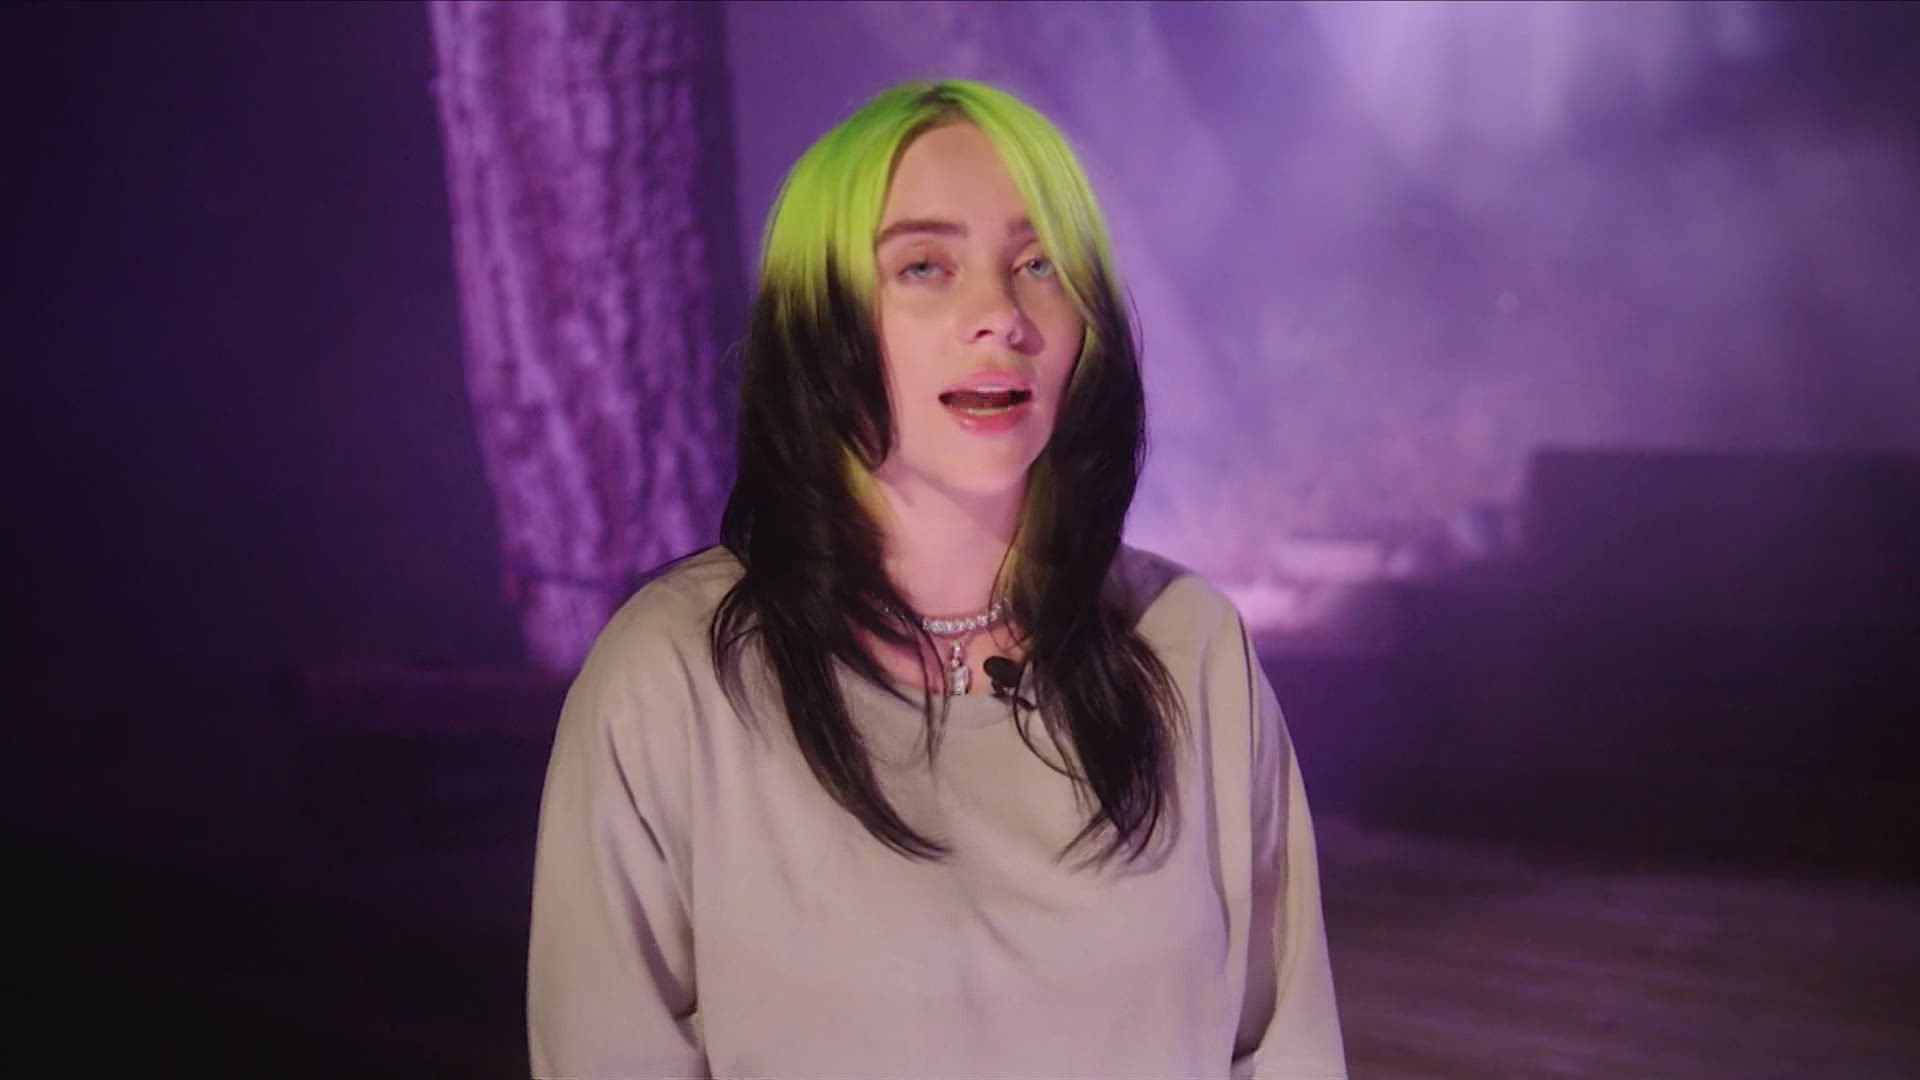 Billie Eilish performs 'My Future' for first time at DNC | 13newsnow.com